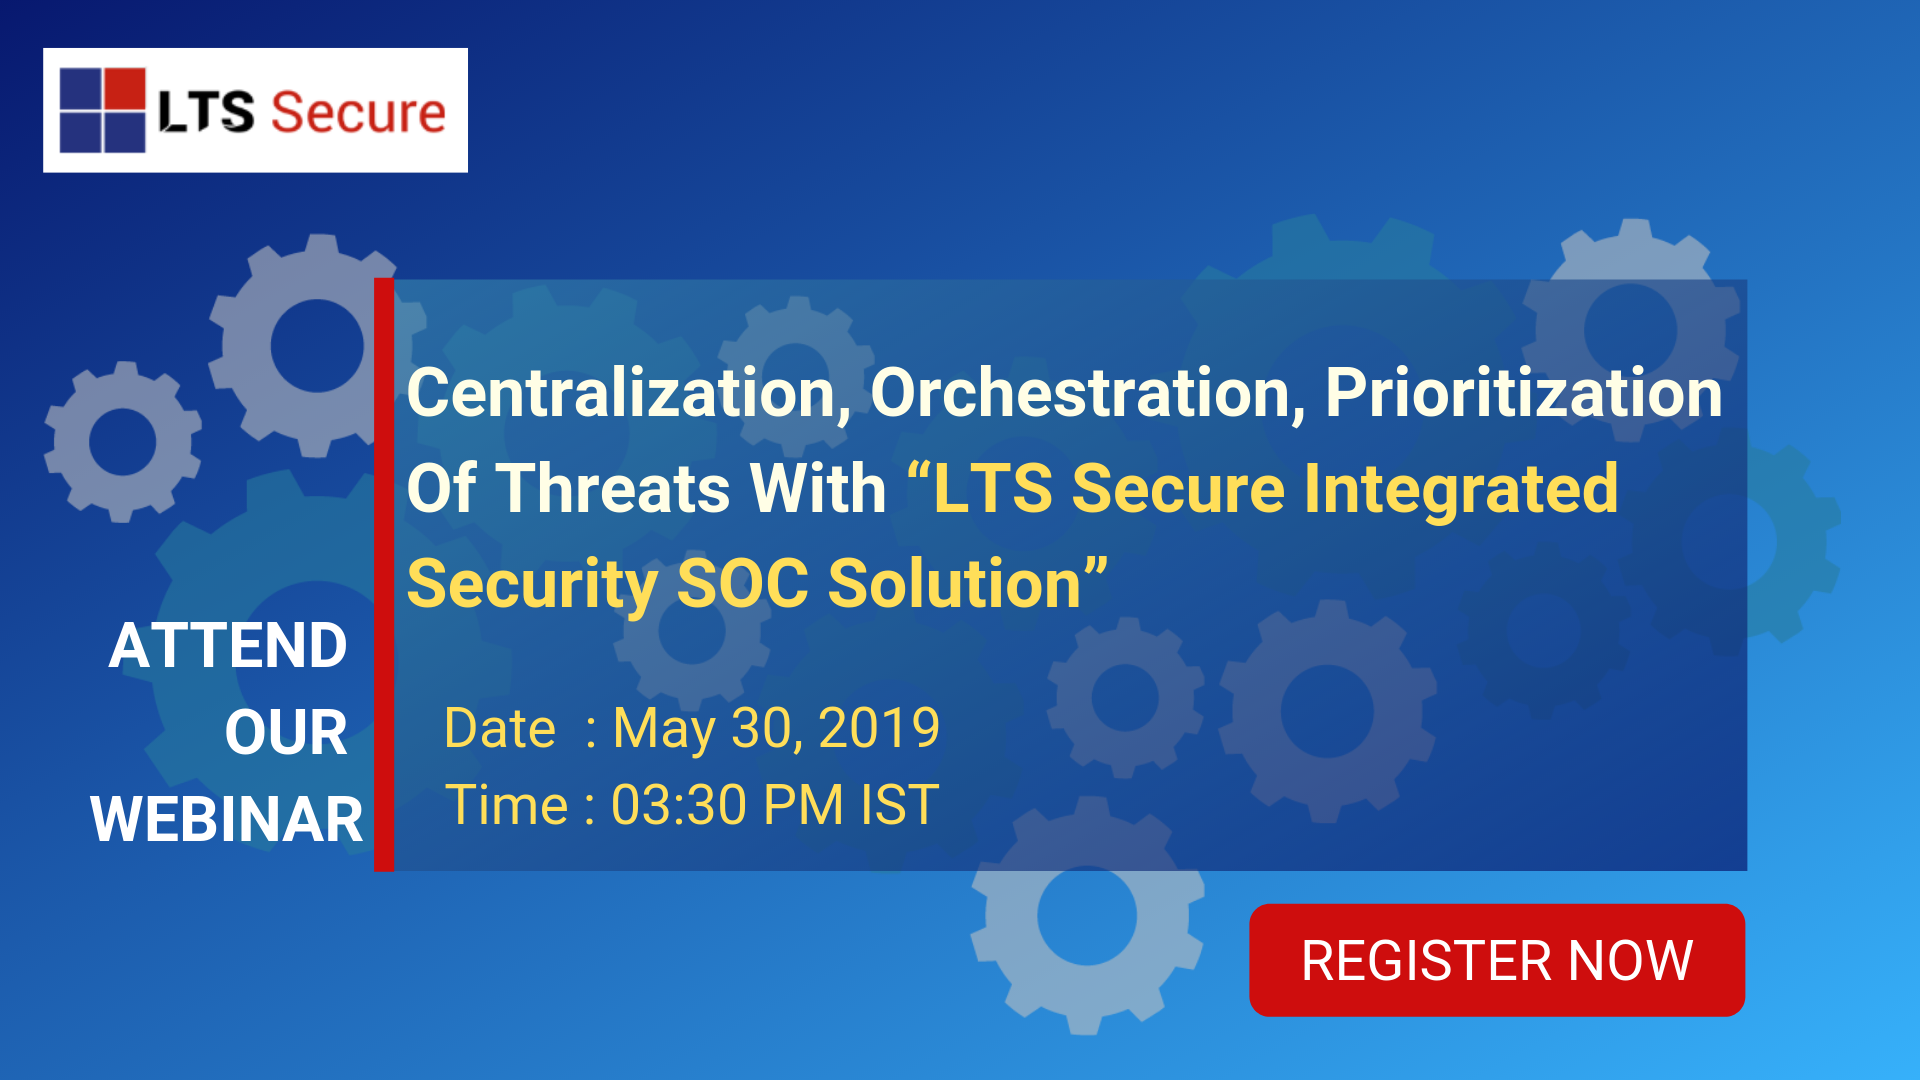 Centralization Orchestration Prioritization Of Threats With LTS Secure SOC, Pune, Maharashtra, India